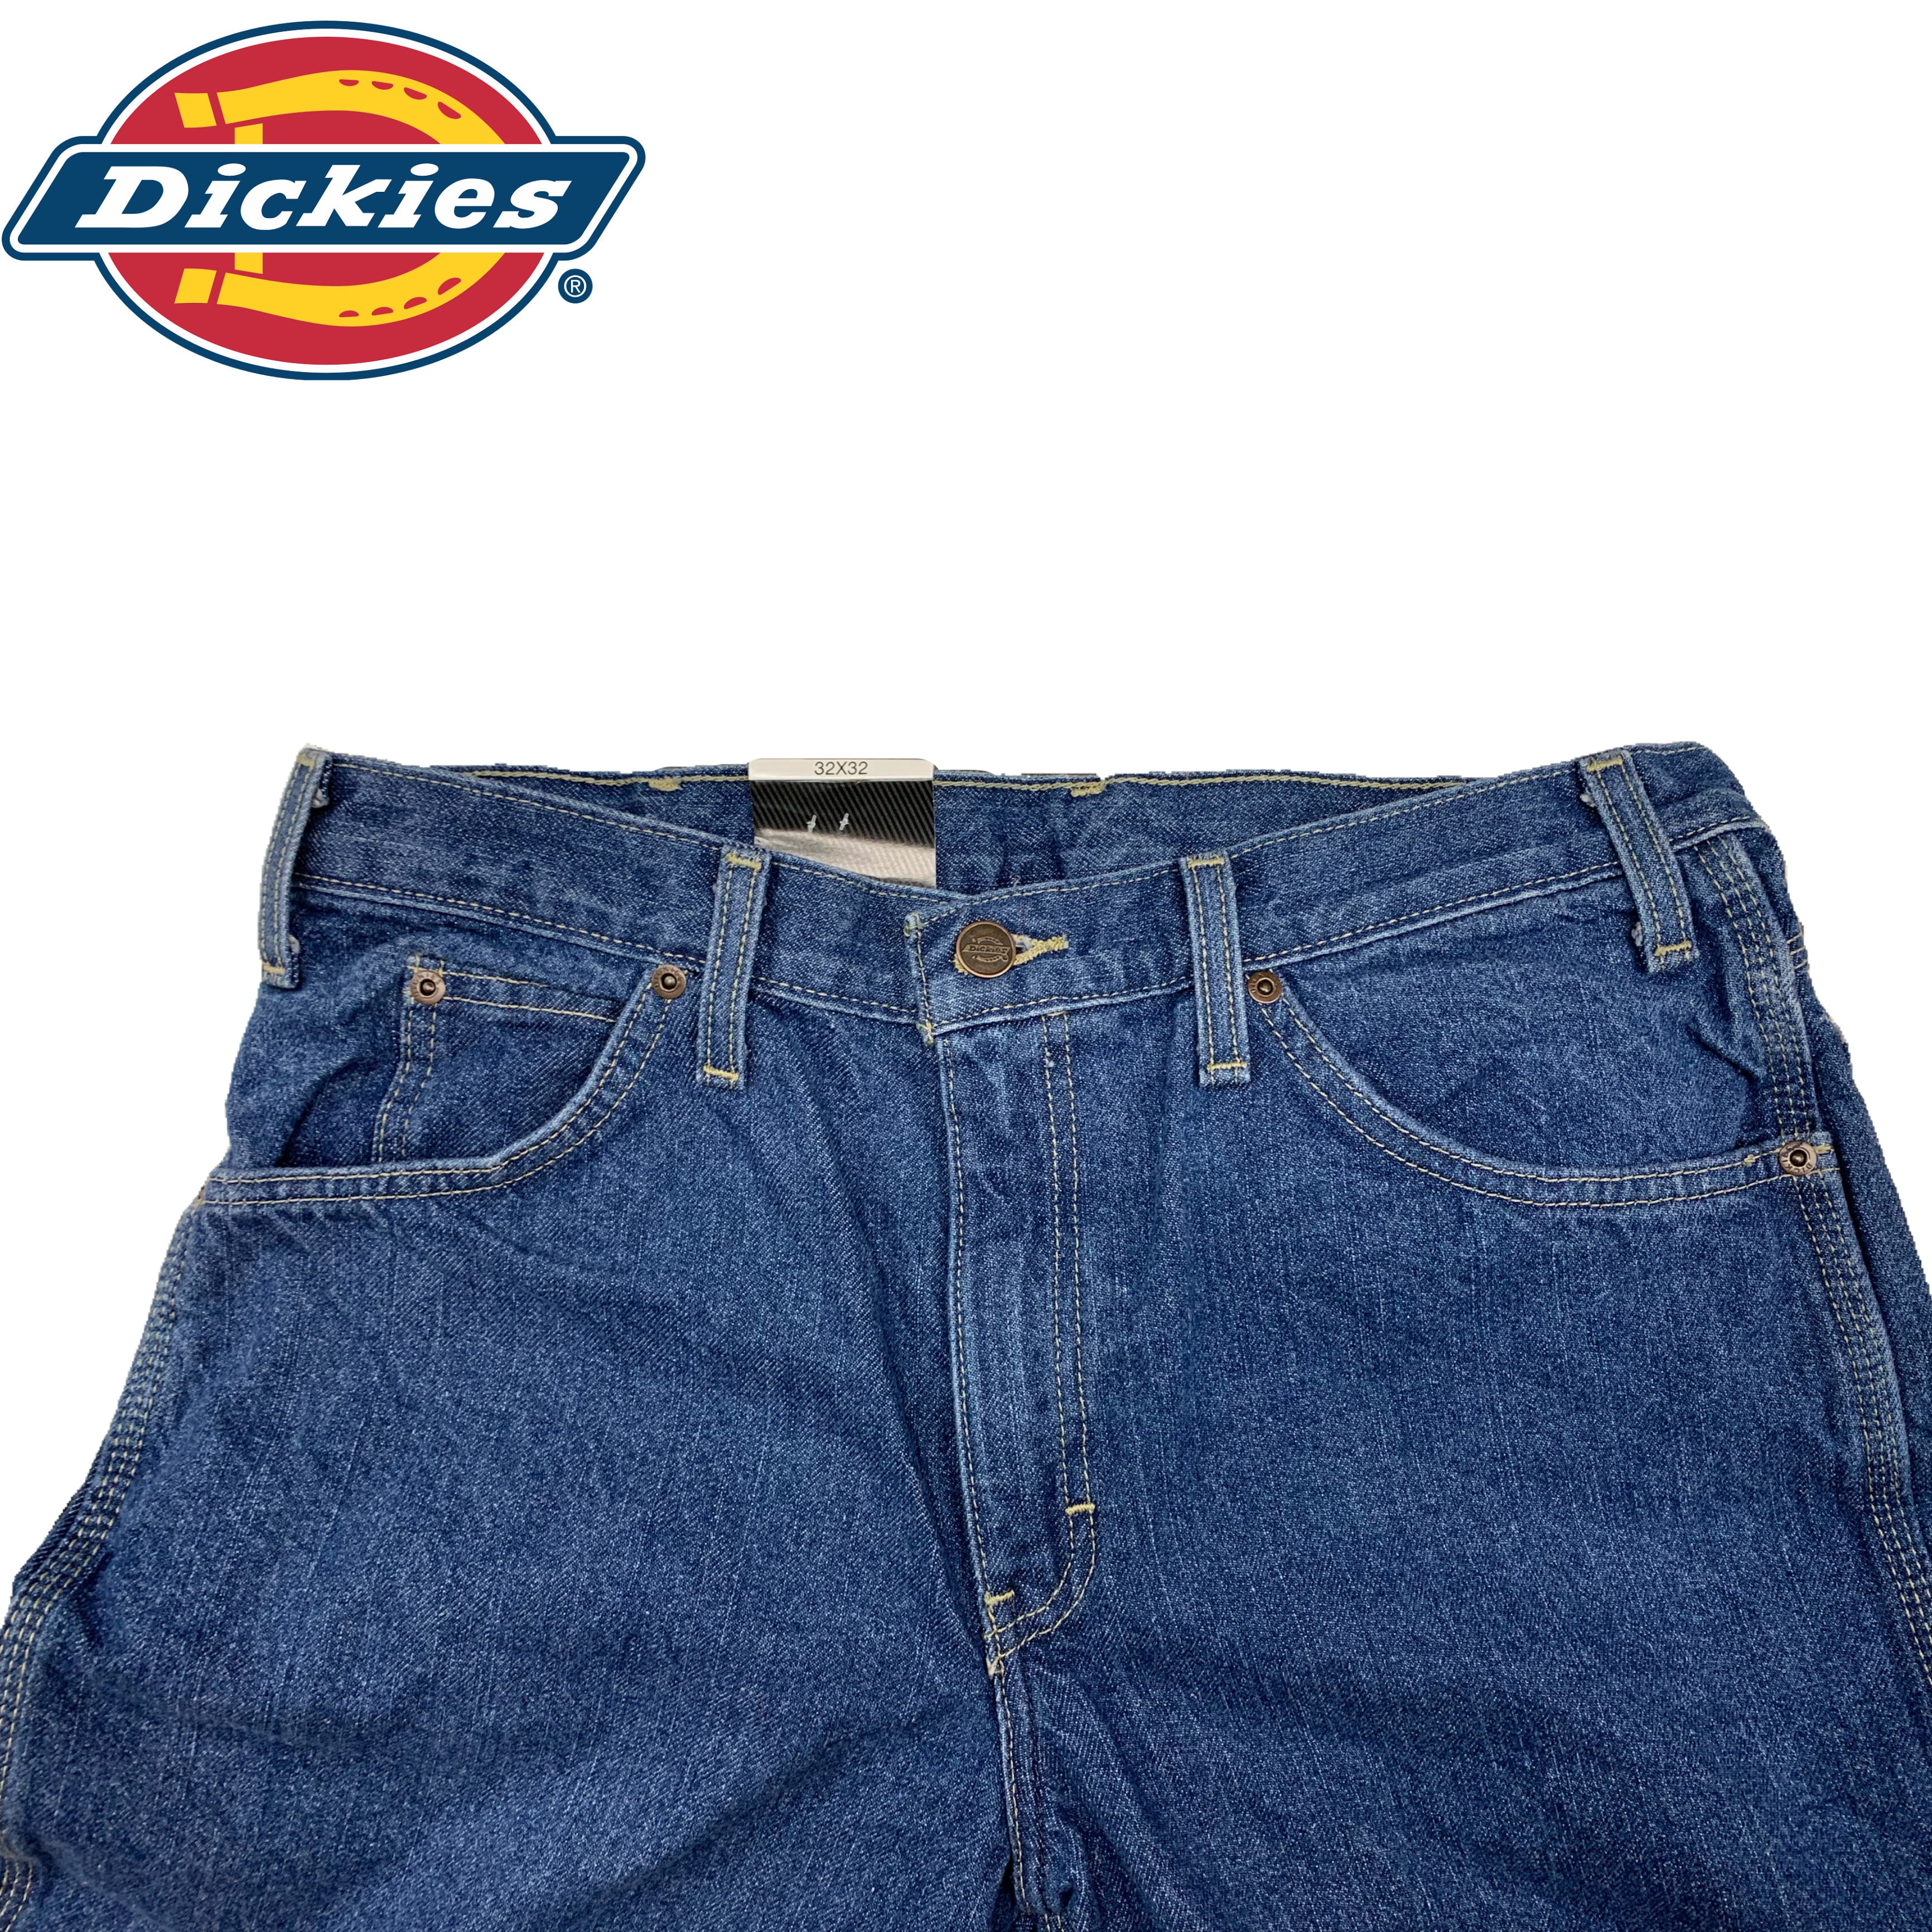 Dickies Relaxed Fit Carpenter Jeans - Stonewashed